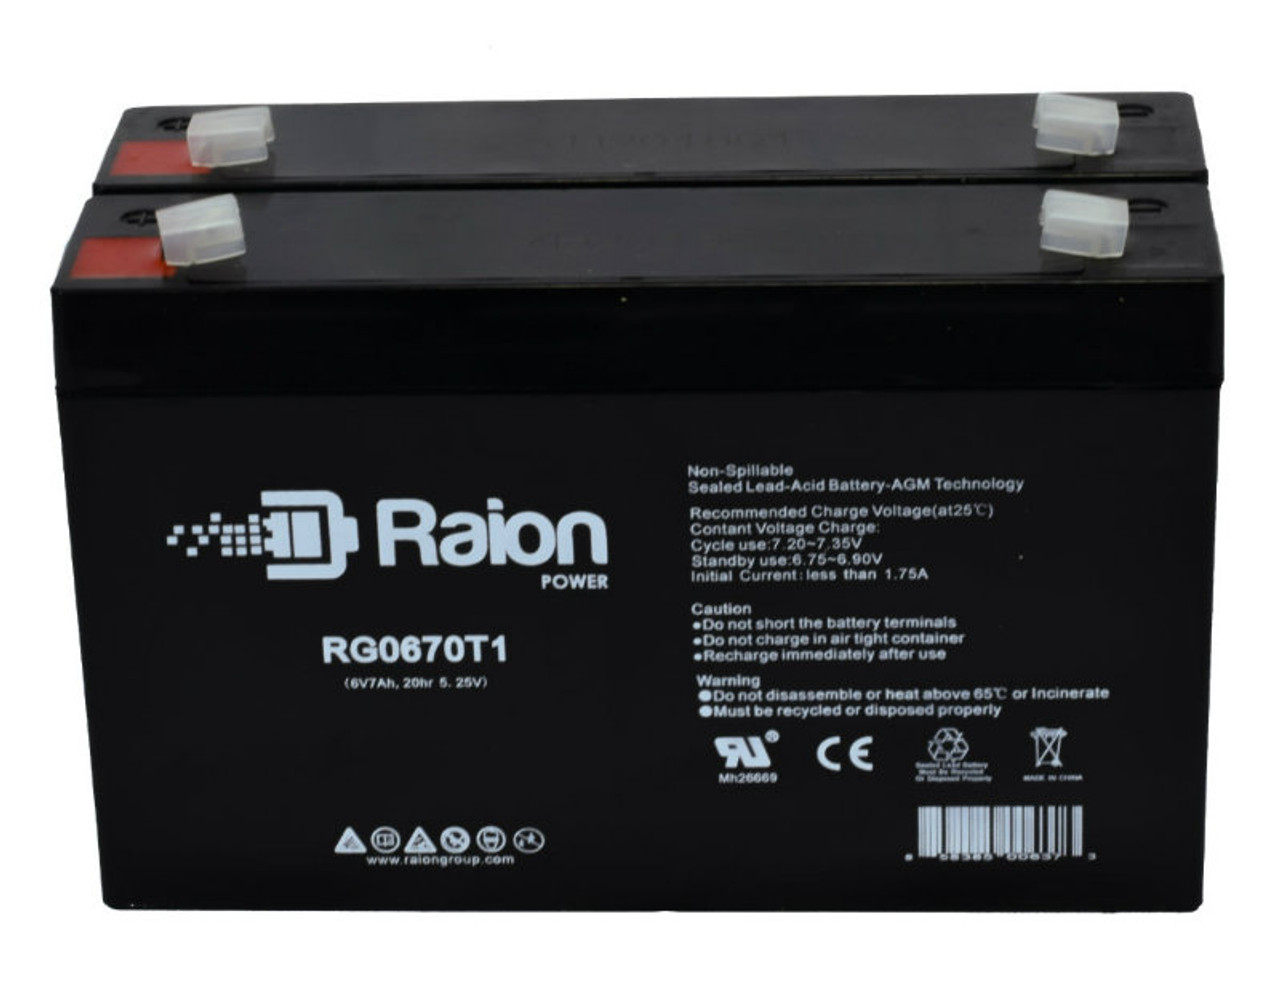 Raion Power RG0670T1 6V 7Ah Replacement Battery for LifeLine 400 ERC Switchboard Unit - 2 Pack